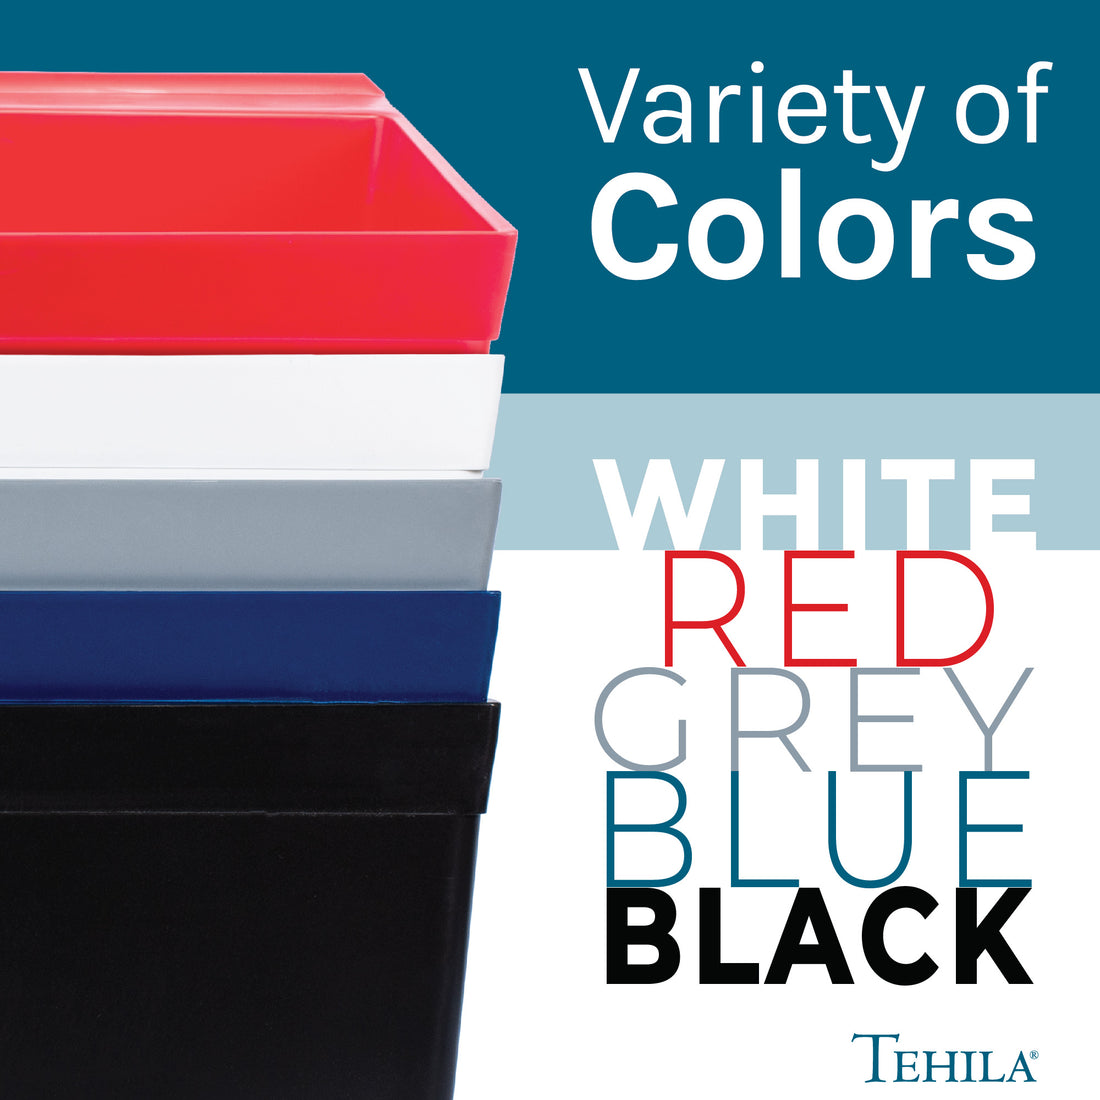 Standard Utility Sink  with its Variety of Colors White | Red | Grey | Blue | Black